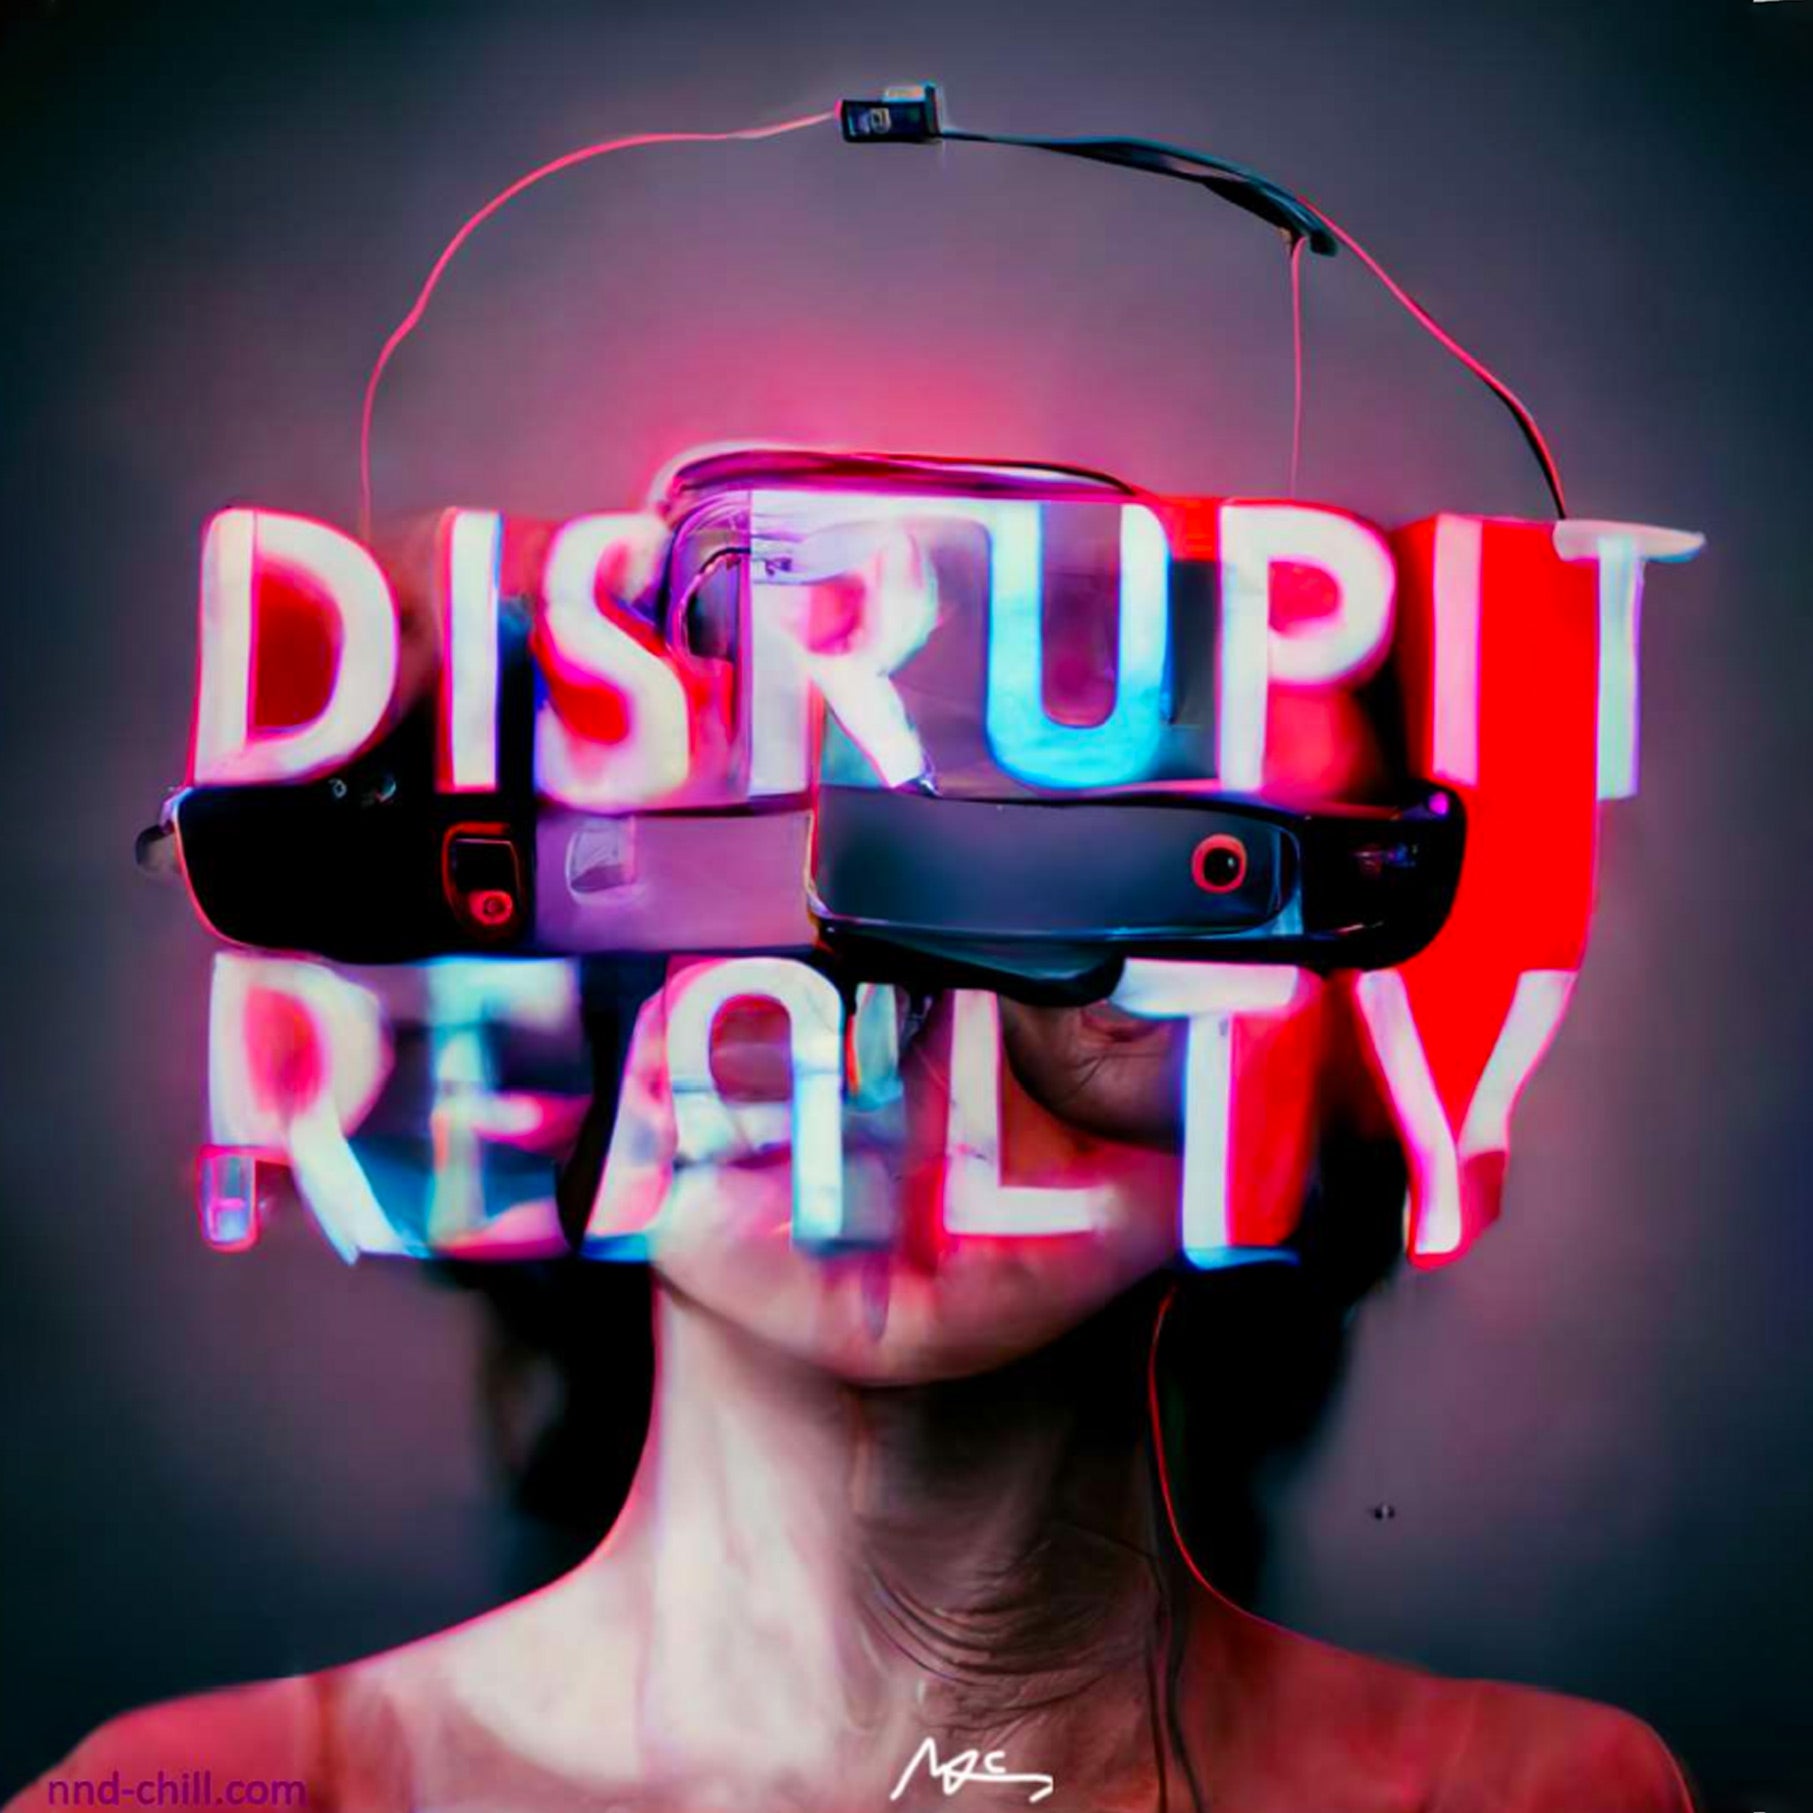 Disrupt Reality to create the Chill